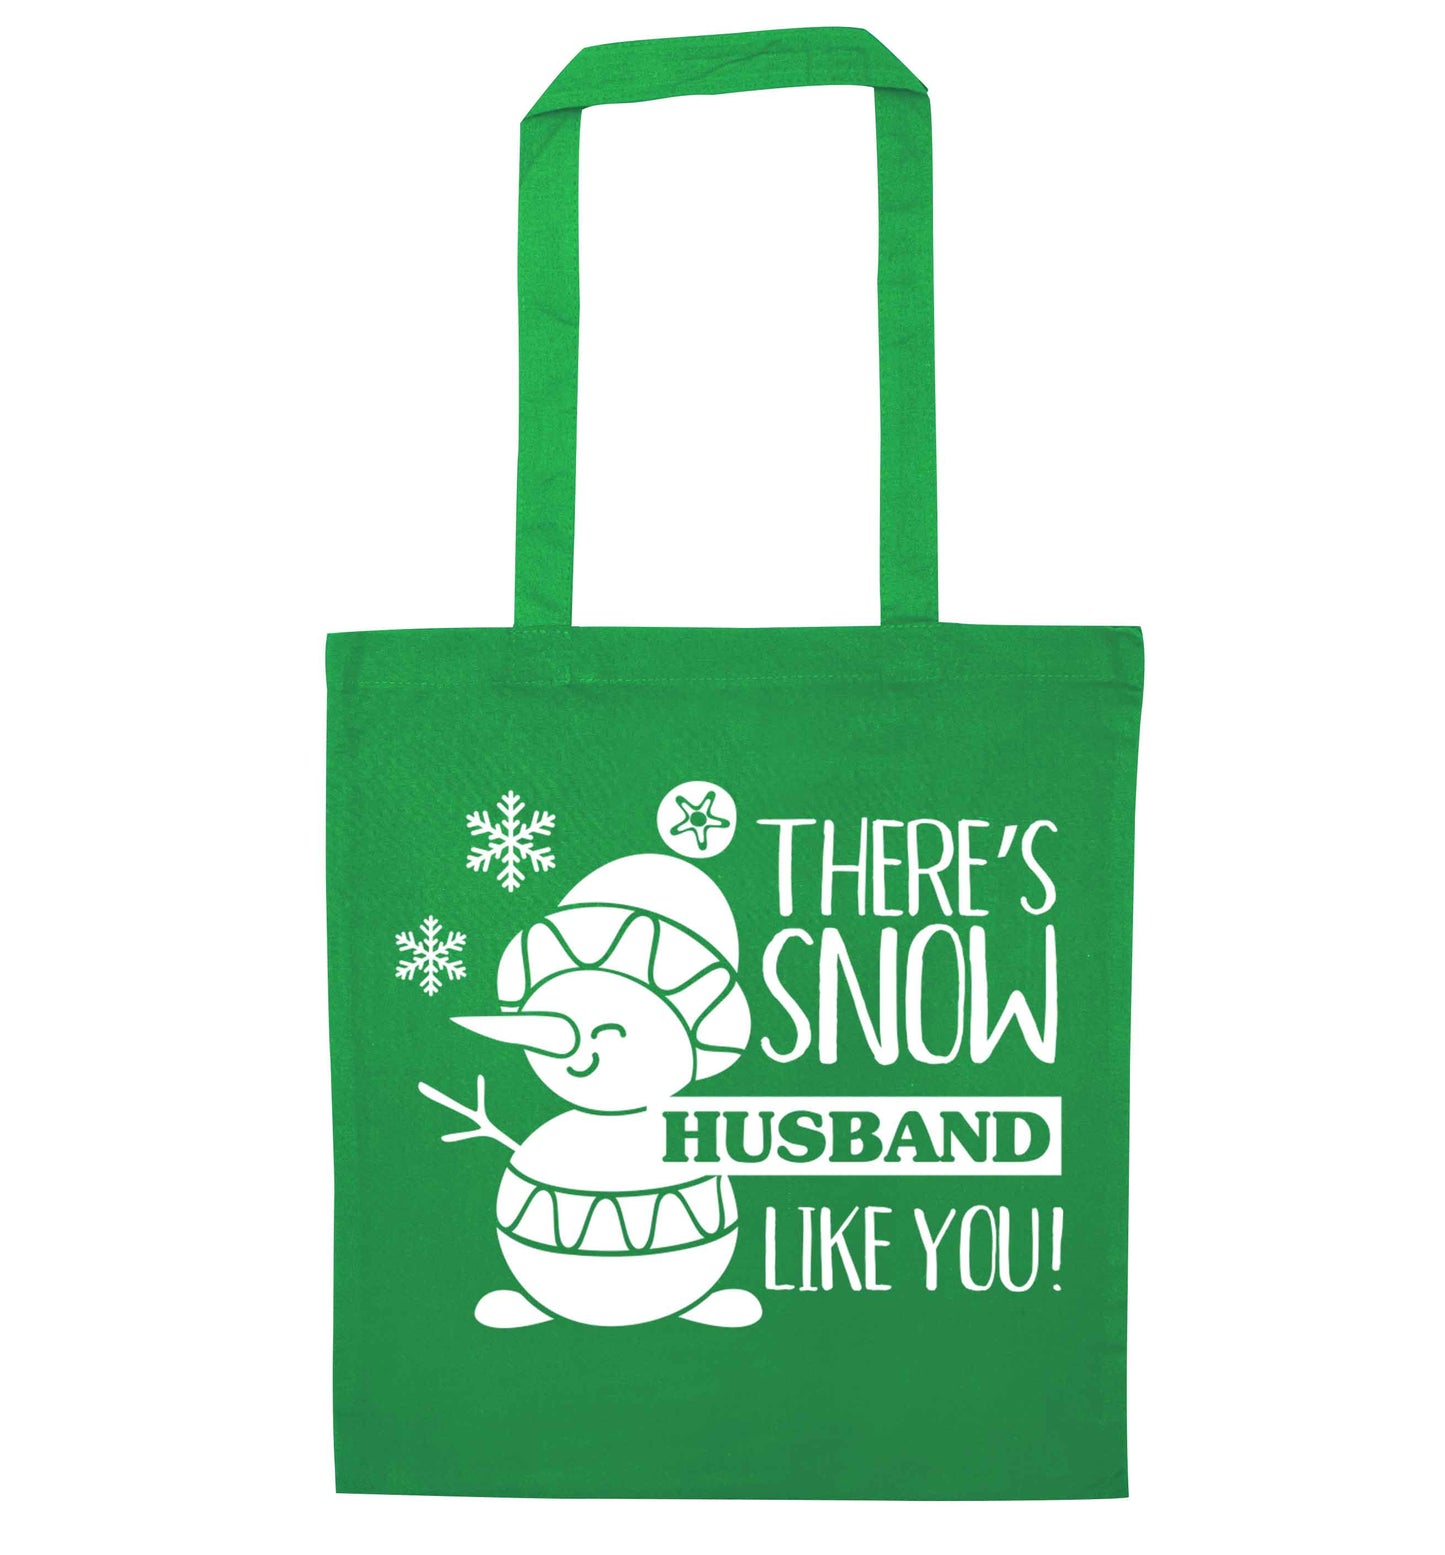 There's snow husband like you green tote bag